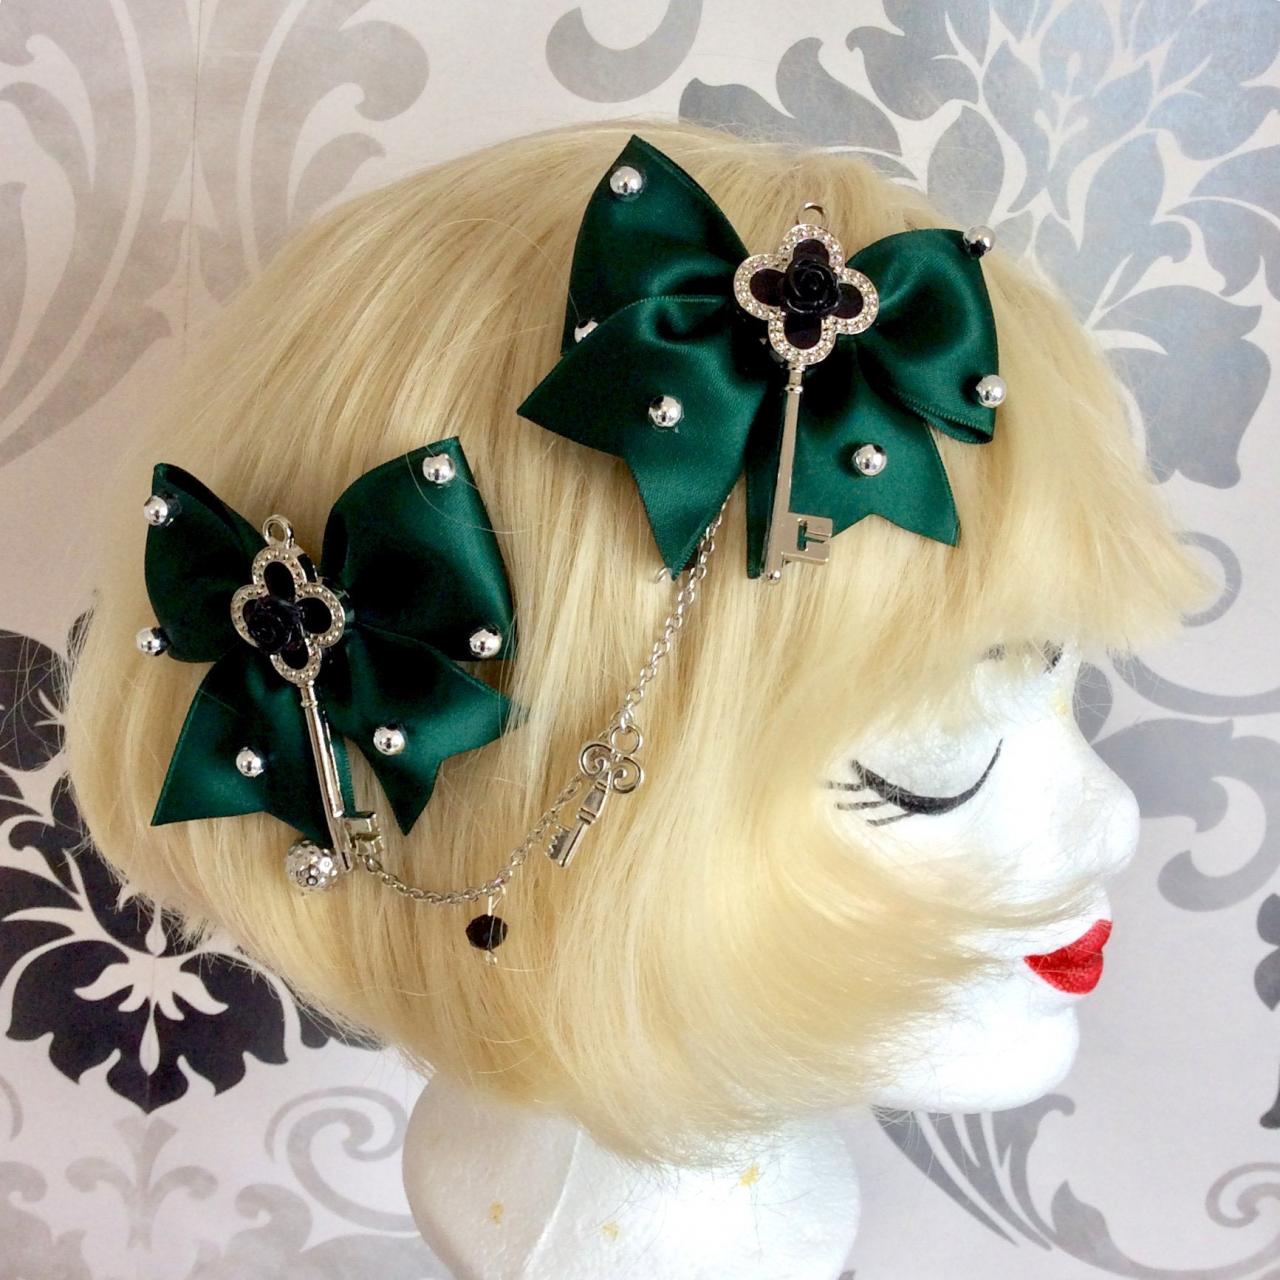 Pretty Satin Bows With Pearl Necklace Brow Necklace Key Alice Classic Lolita Green Hair Clip Rose Tiara Headpiece Silver Pearls Rhinestone